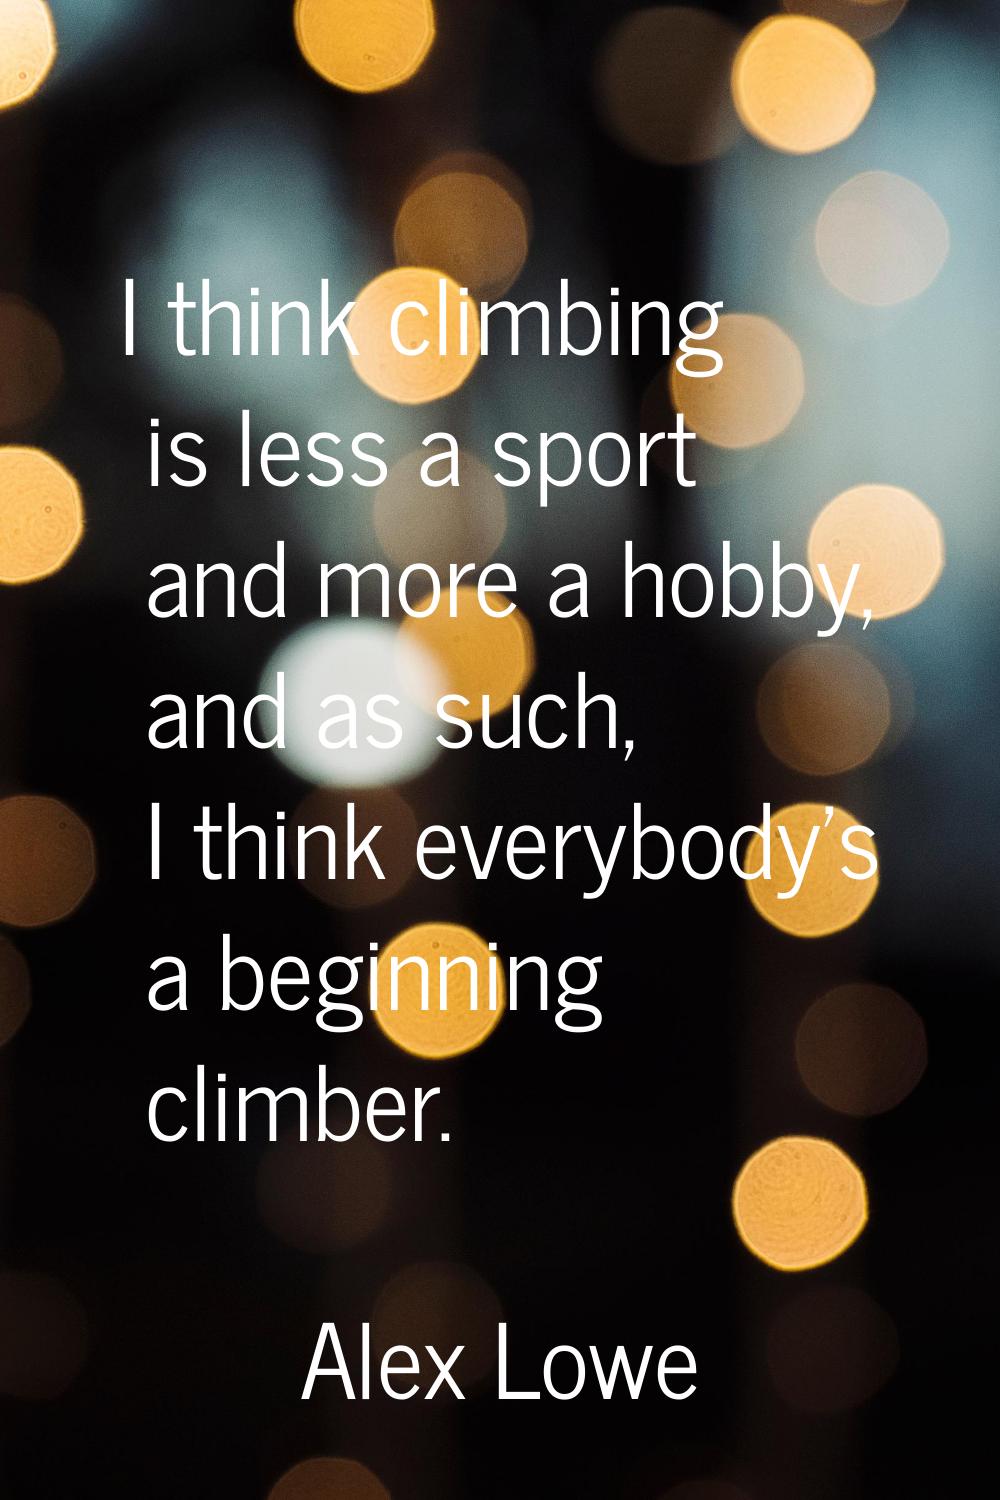 I think climbing is less a sport and more a hobby, and as such, I think everybody's a beginning cli